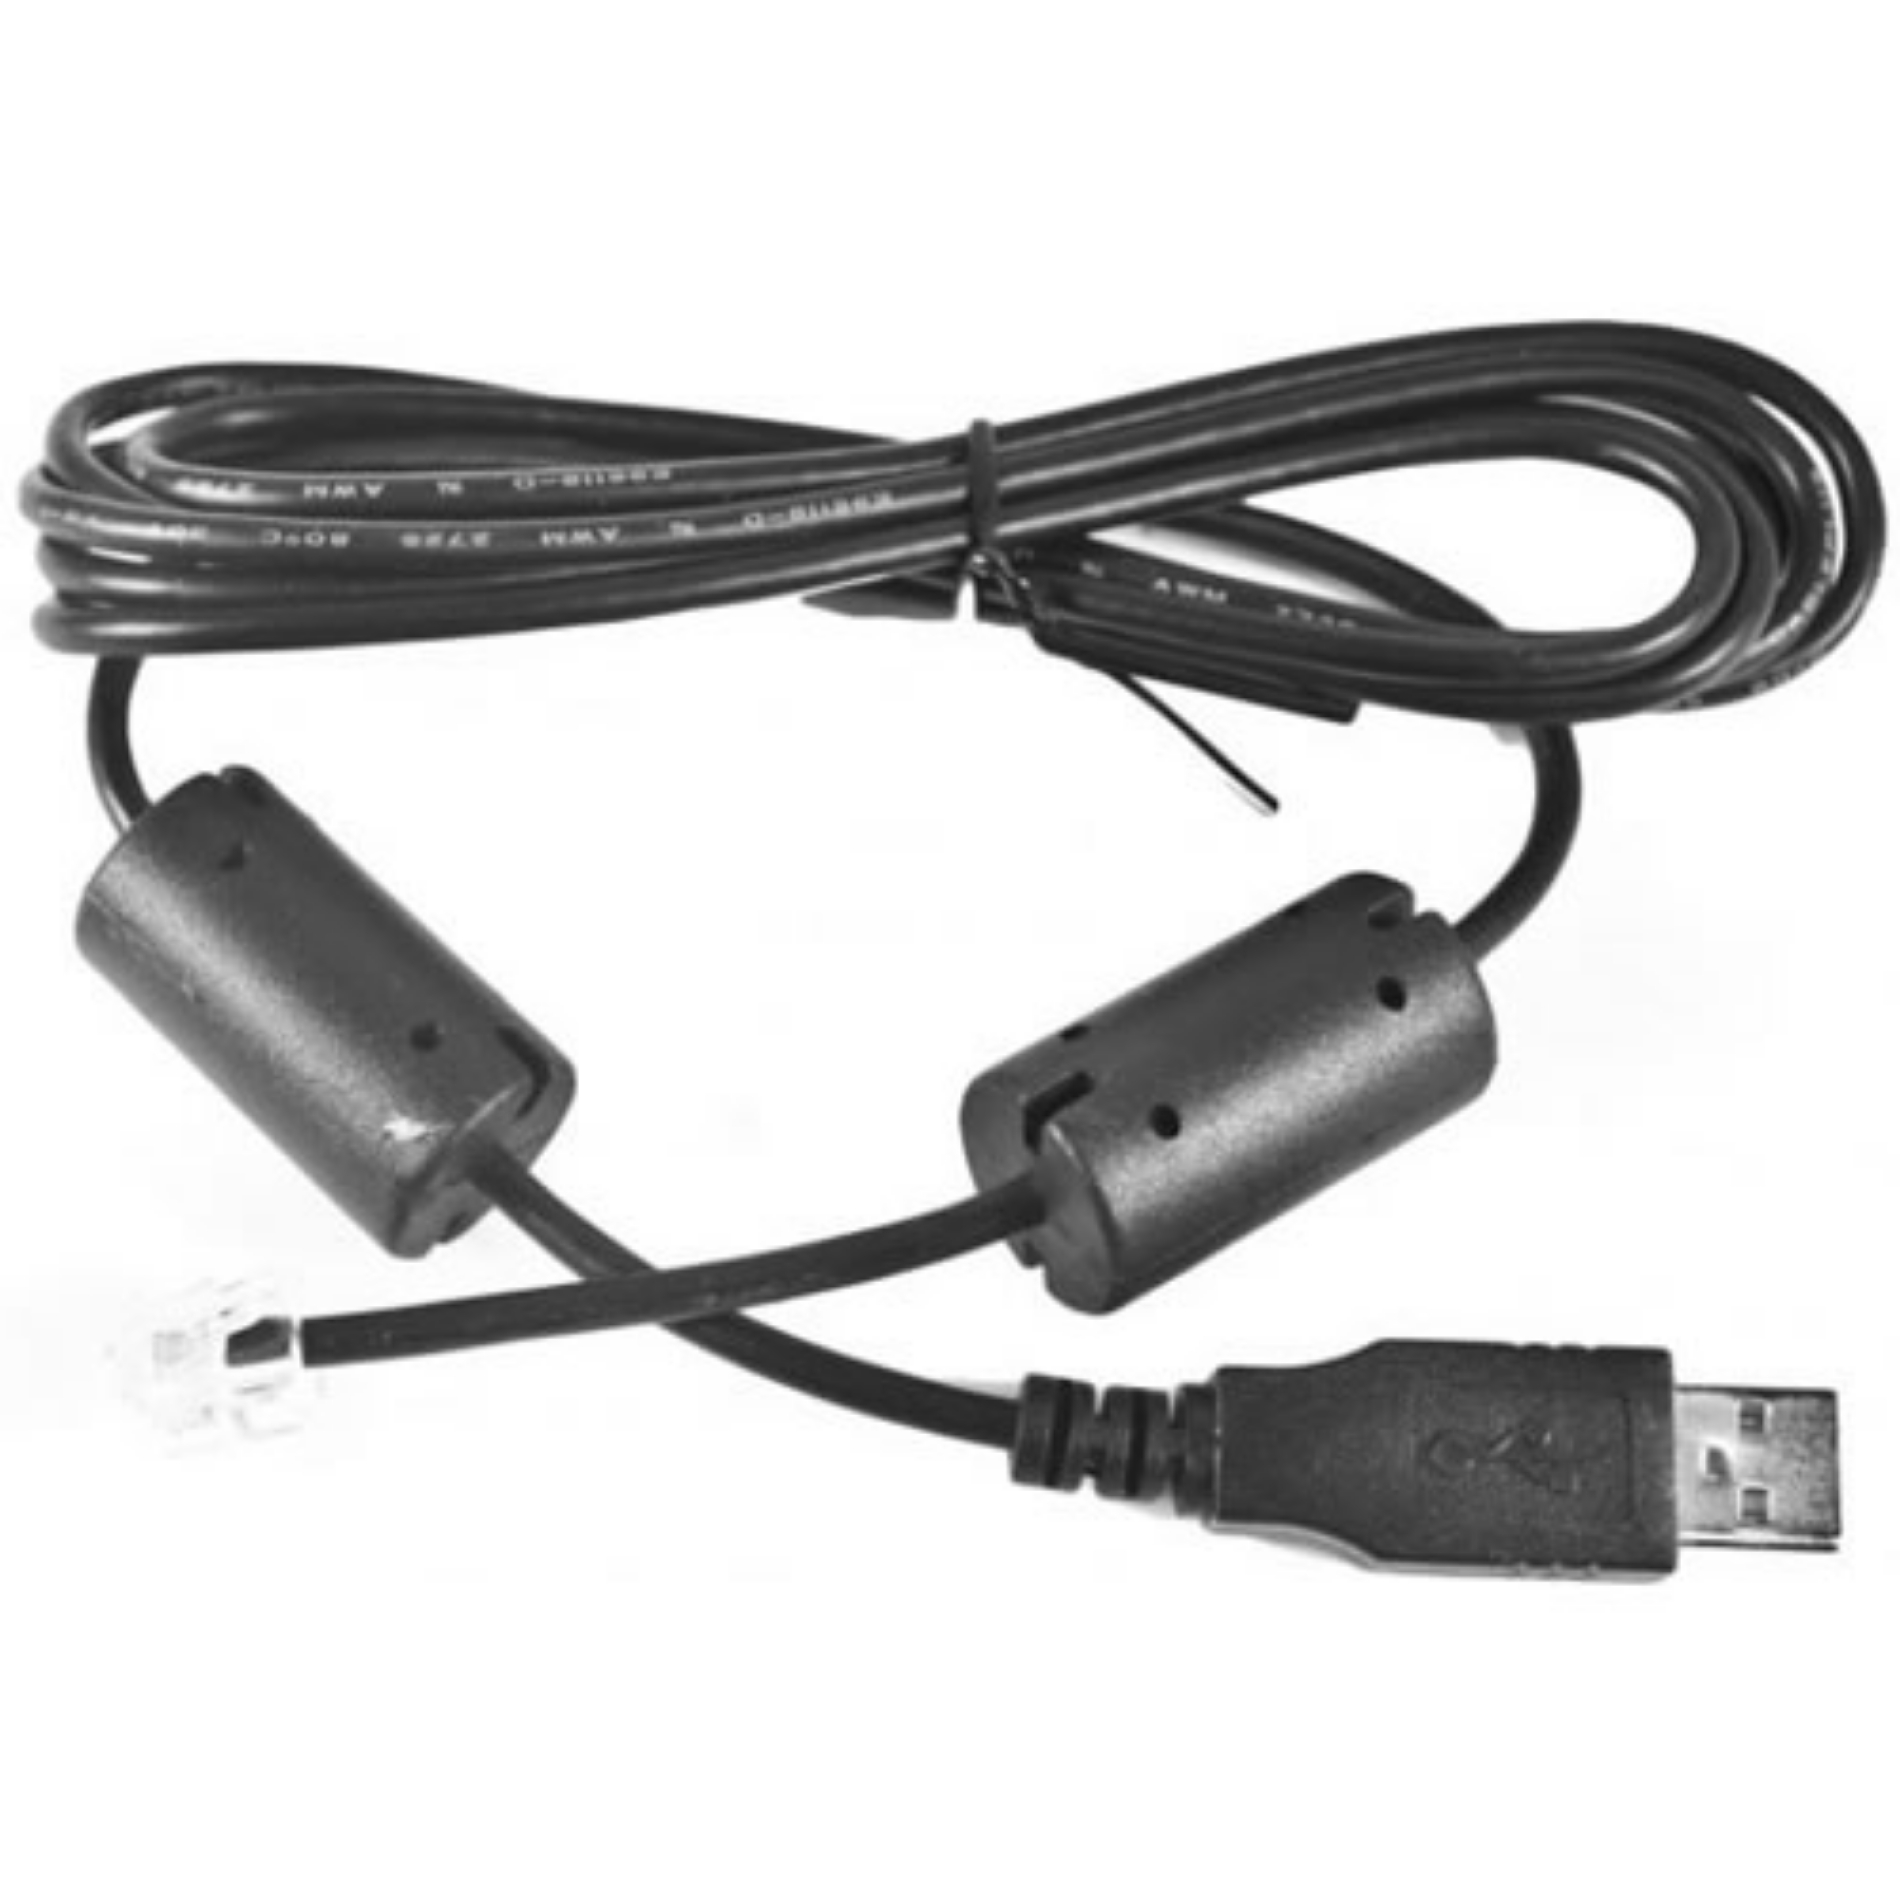 Picture of Leica GEV222 USB Transfer Cable